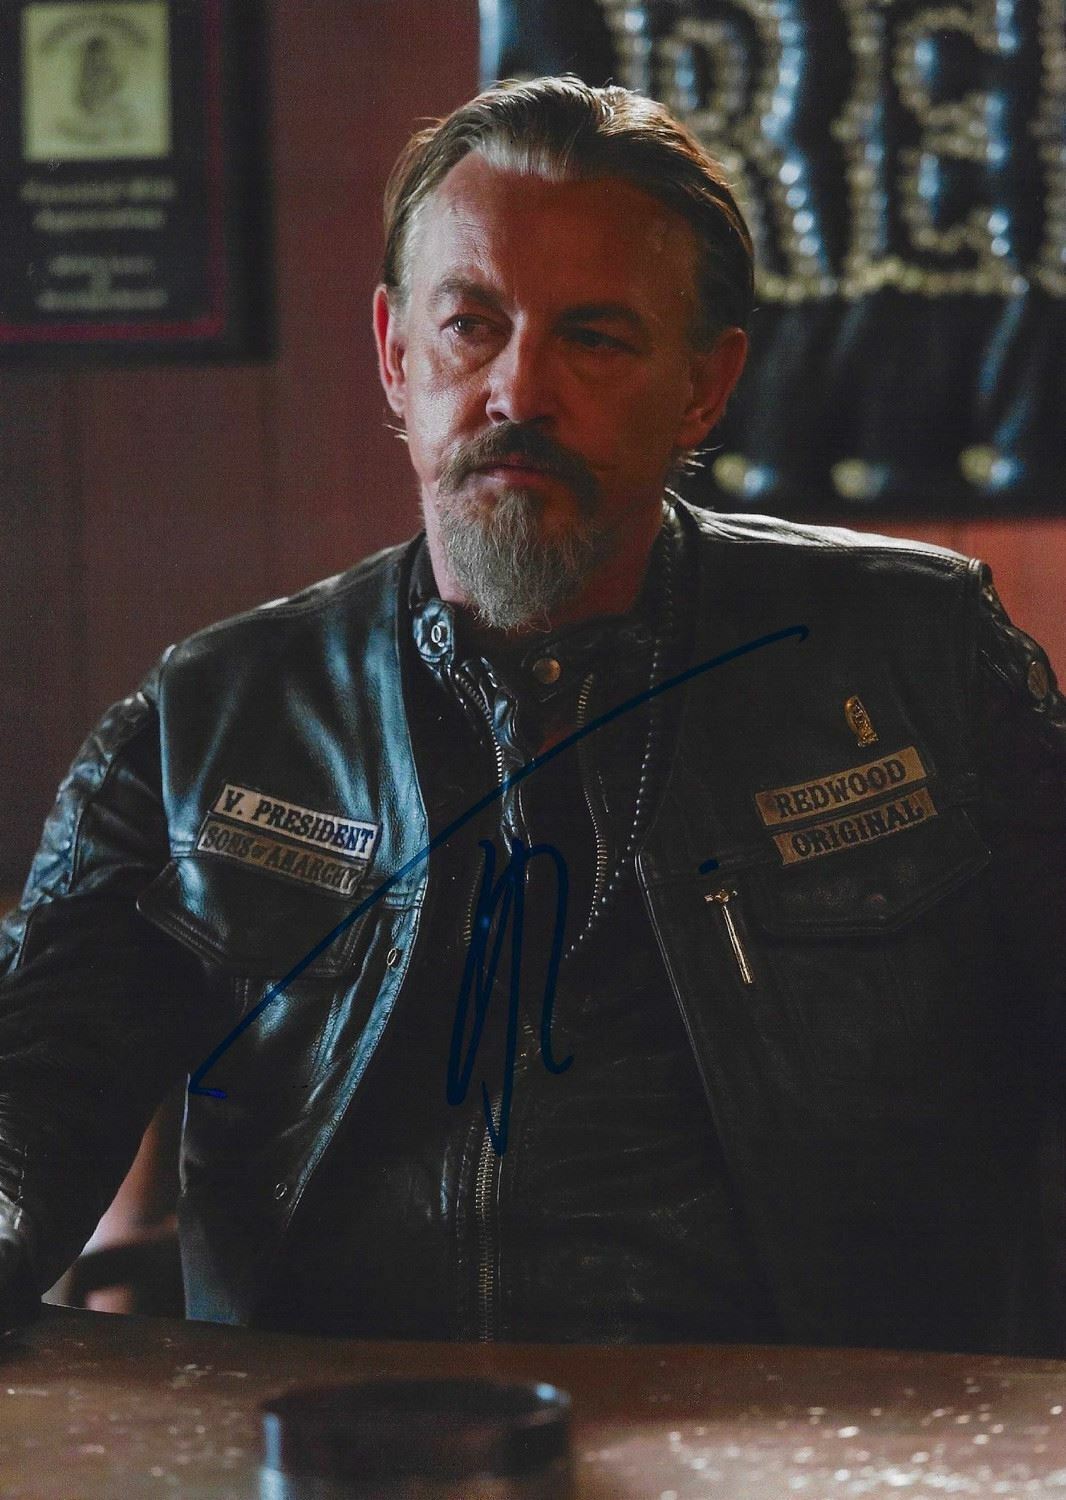 TOMMY FLANAGAN SIGNED CHIBS SONS OF ANARCHY 12x8 PHOTO (AFTAL COA)